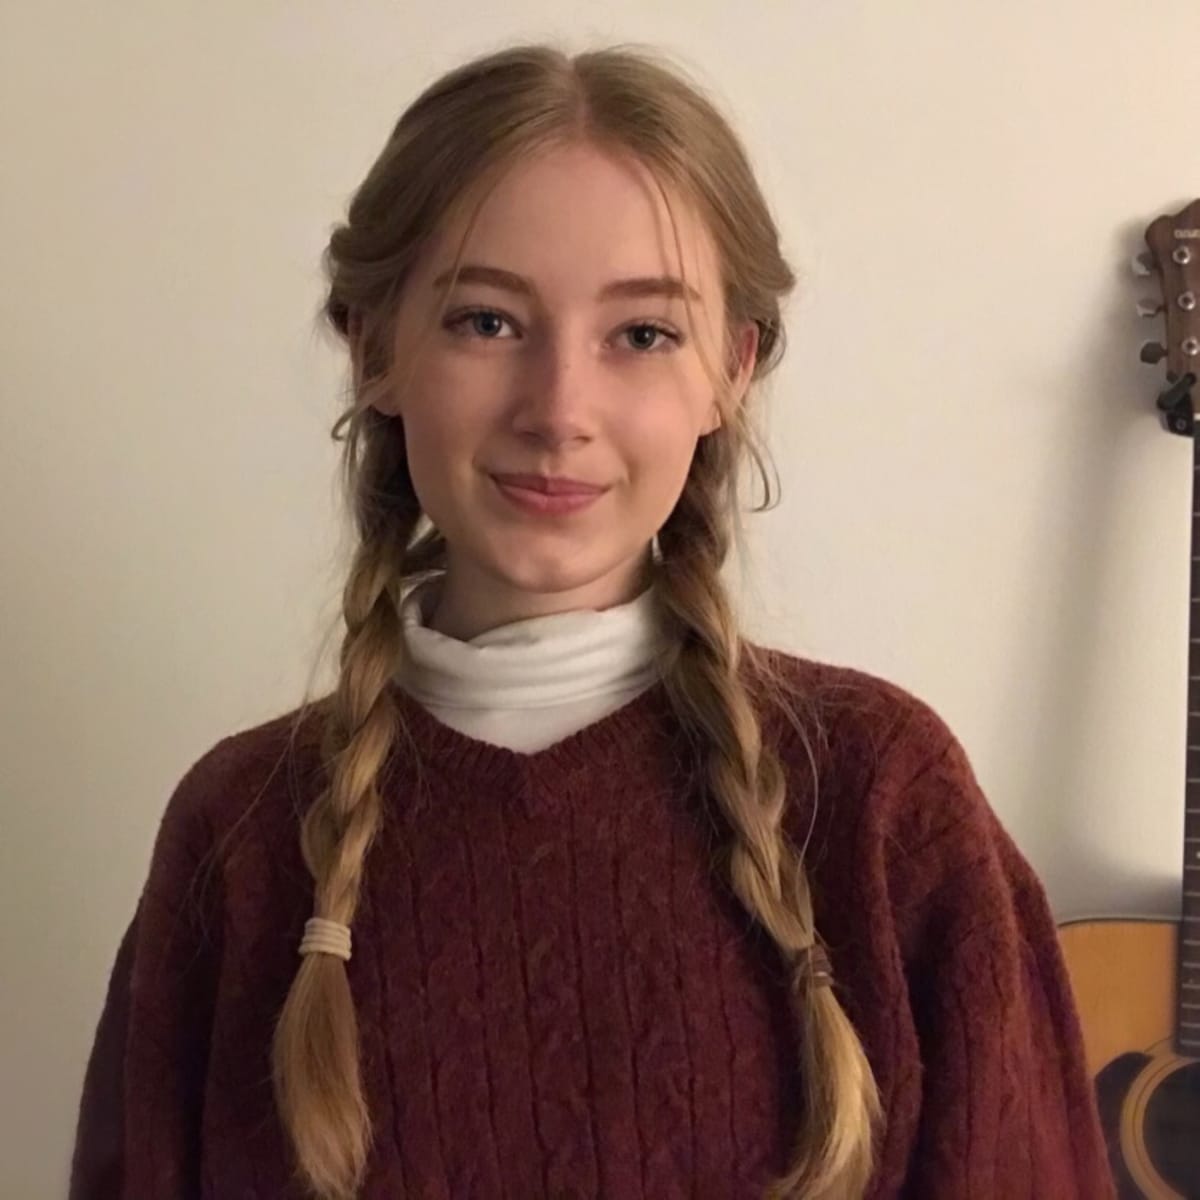 Teen wins prestigious international singer songwriter contest with her first ever penned song